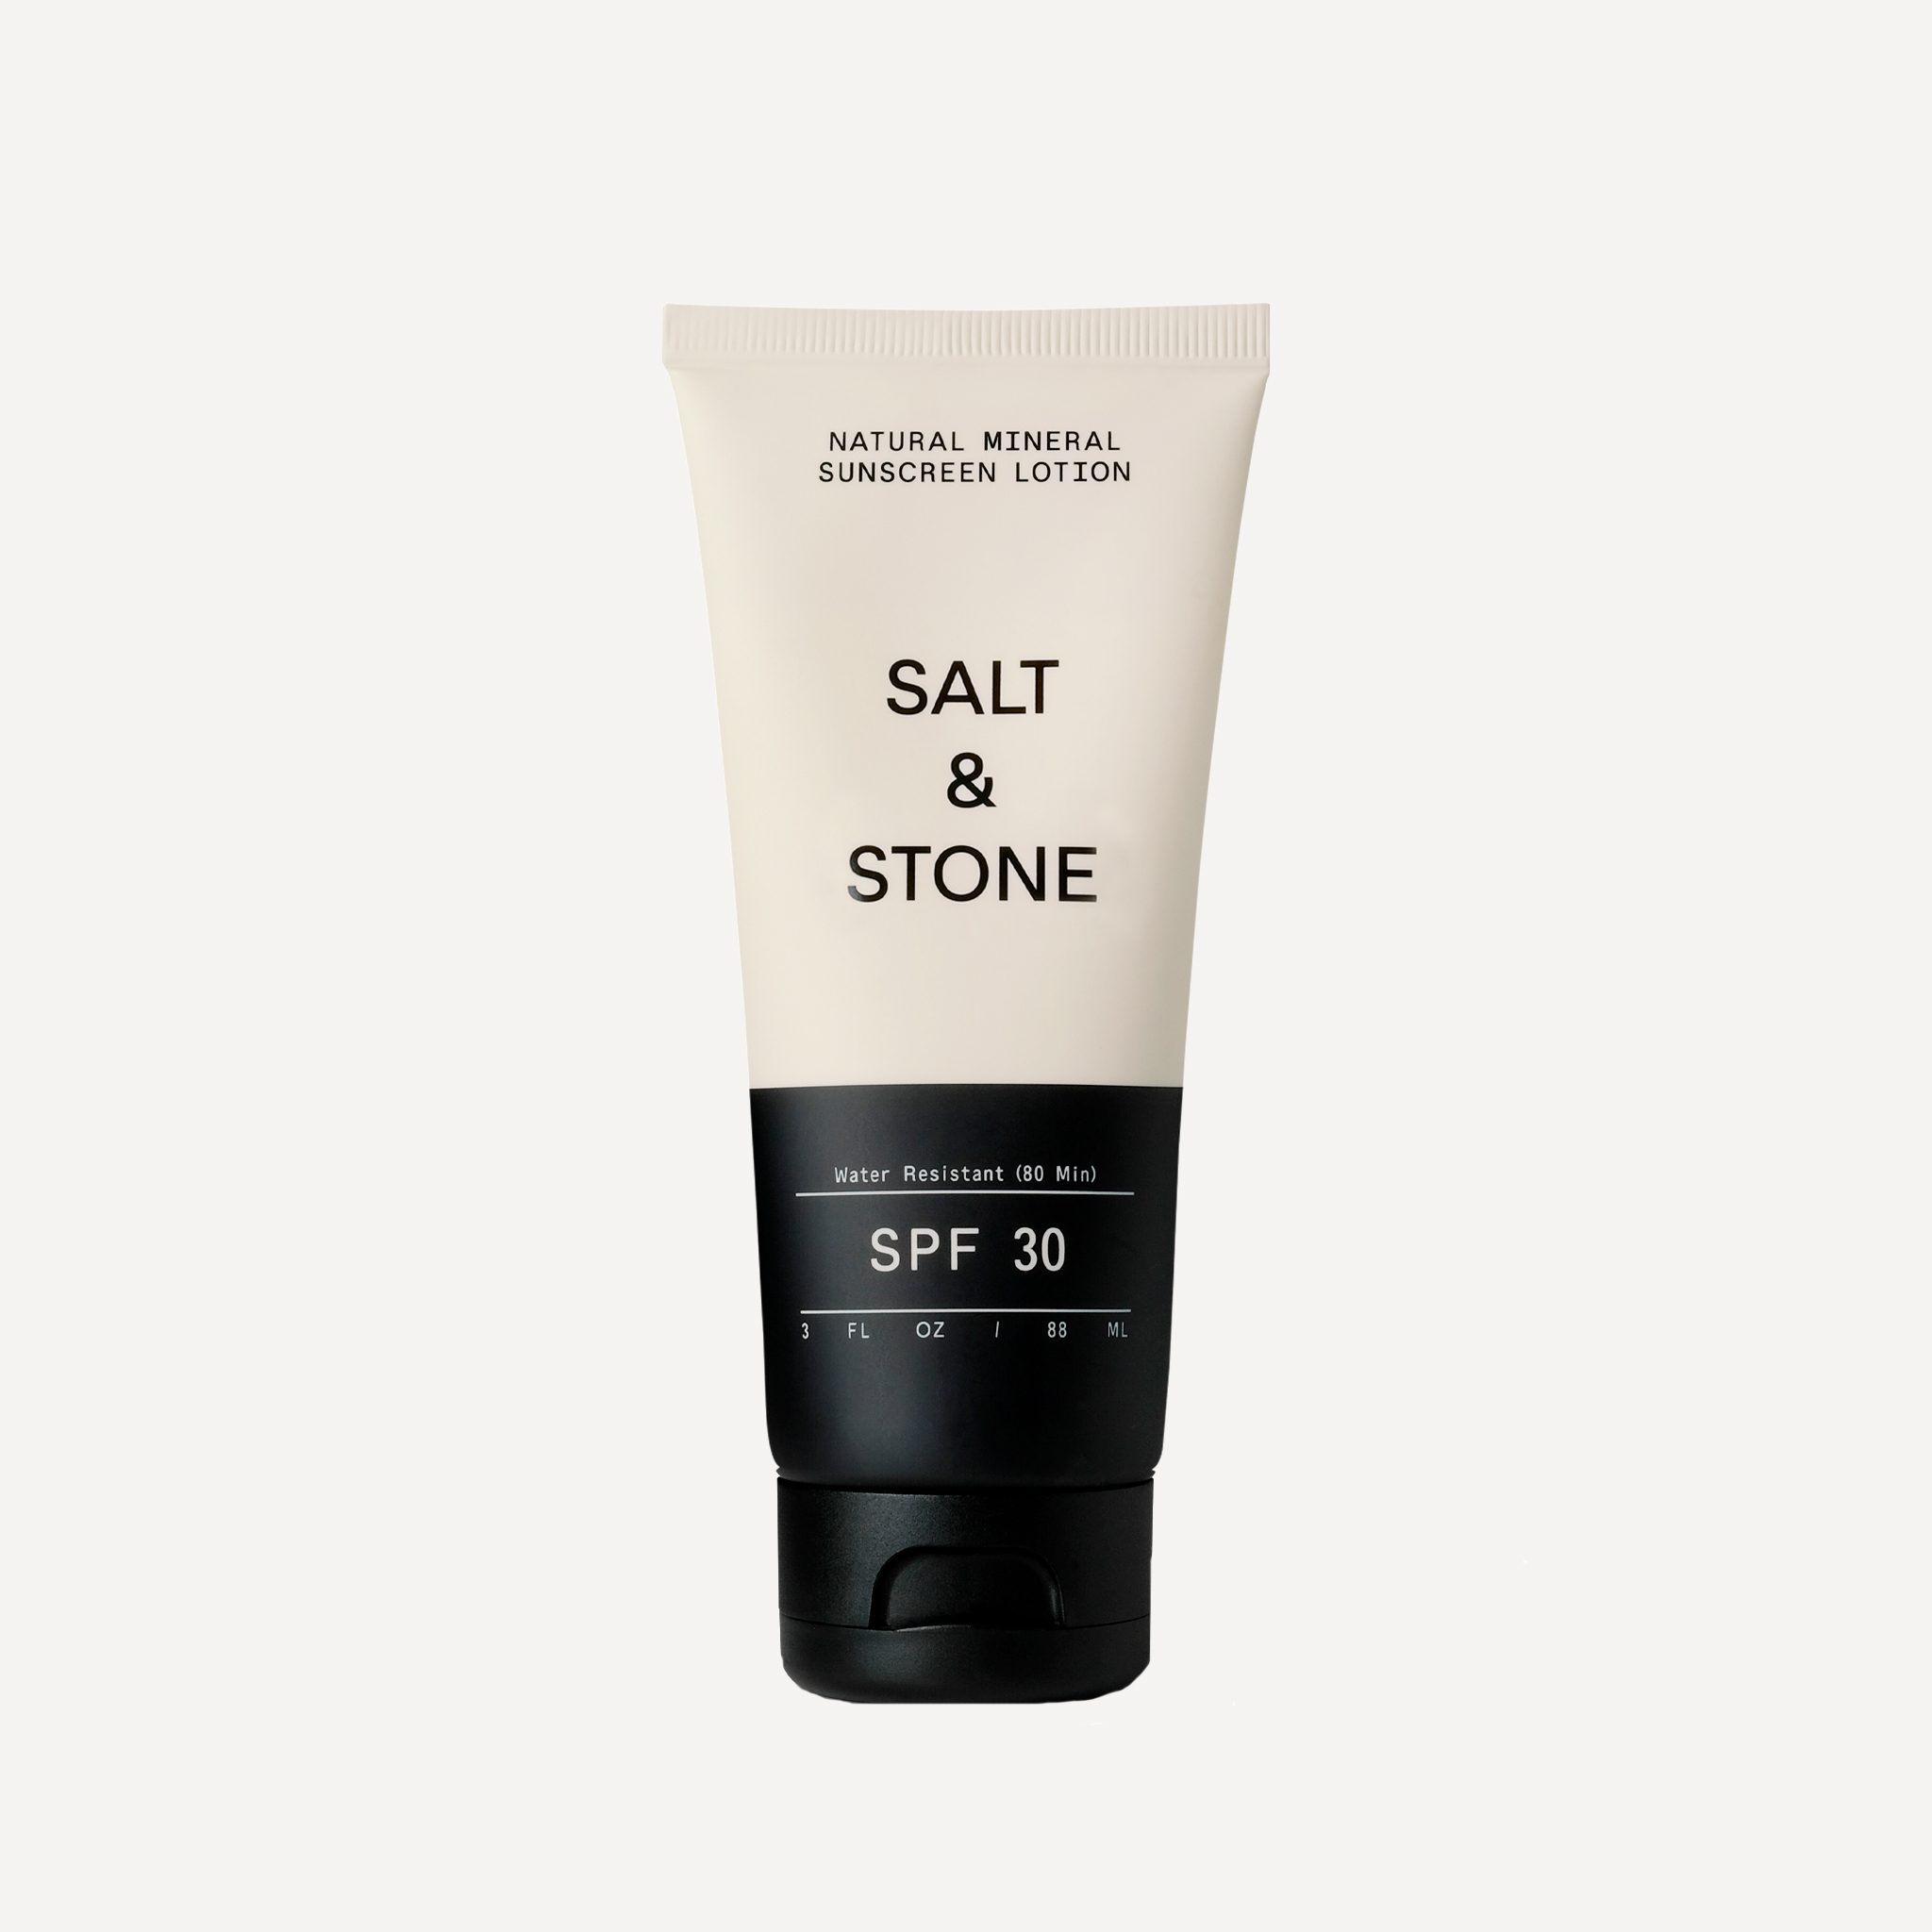 Salt and stone organic sunscreen in black and white bottle